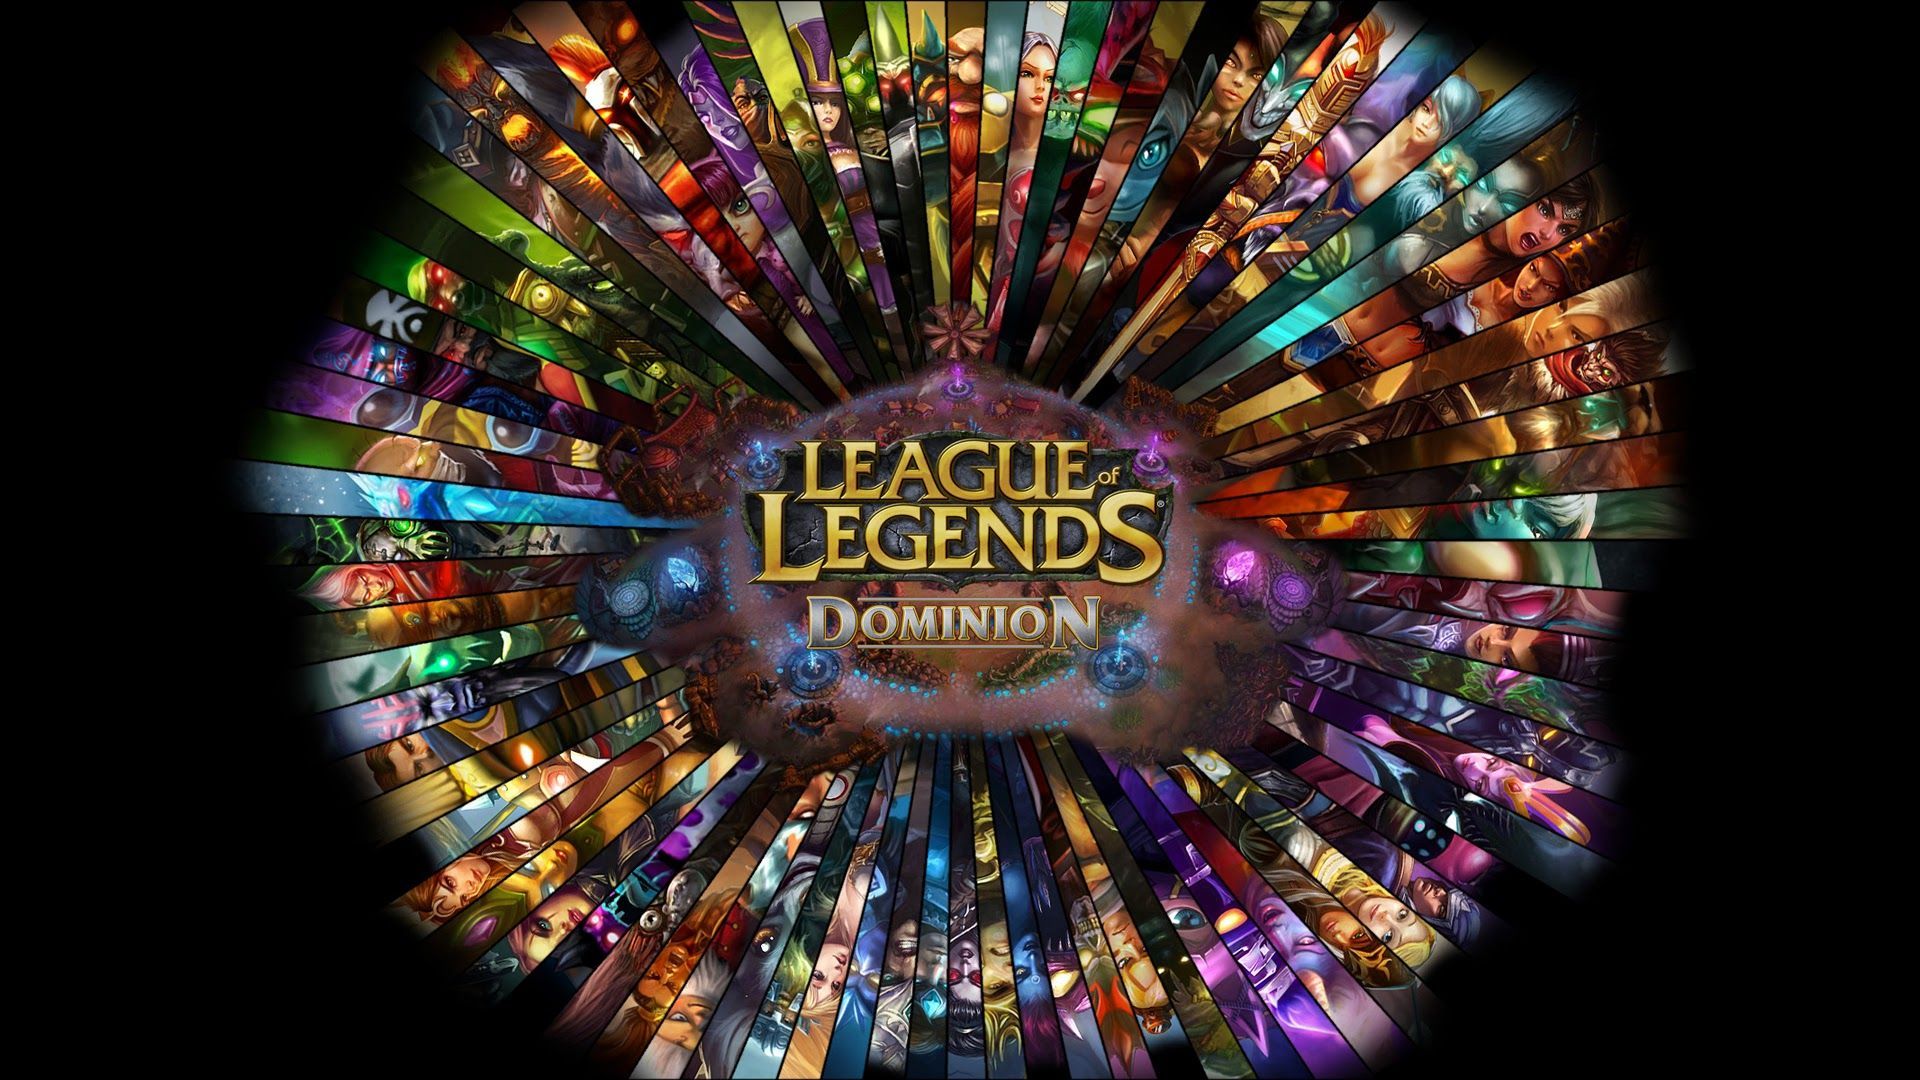 Download League of Legends Wallpapers 4107 1920x1080 px High resolution